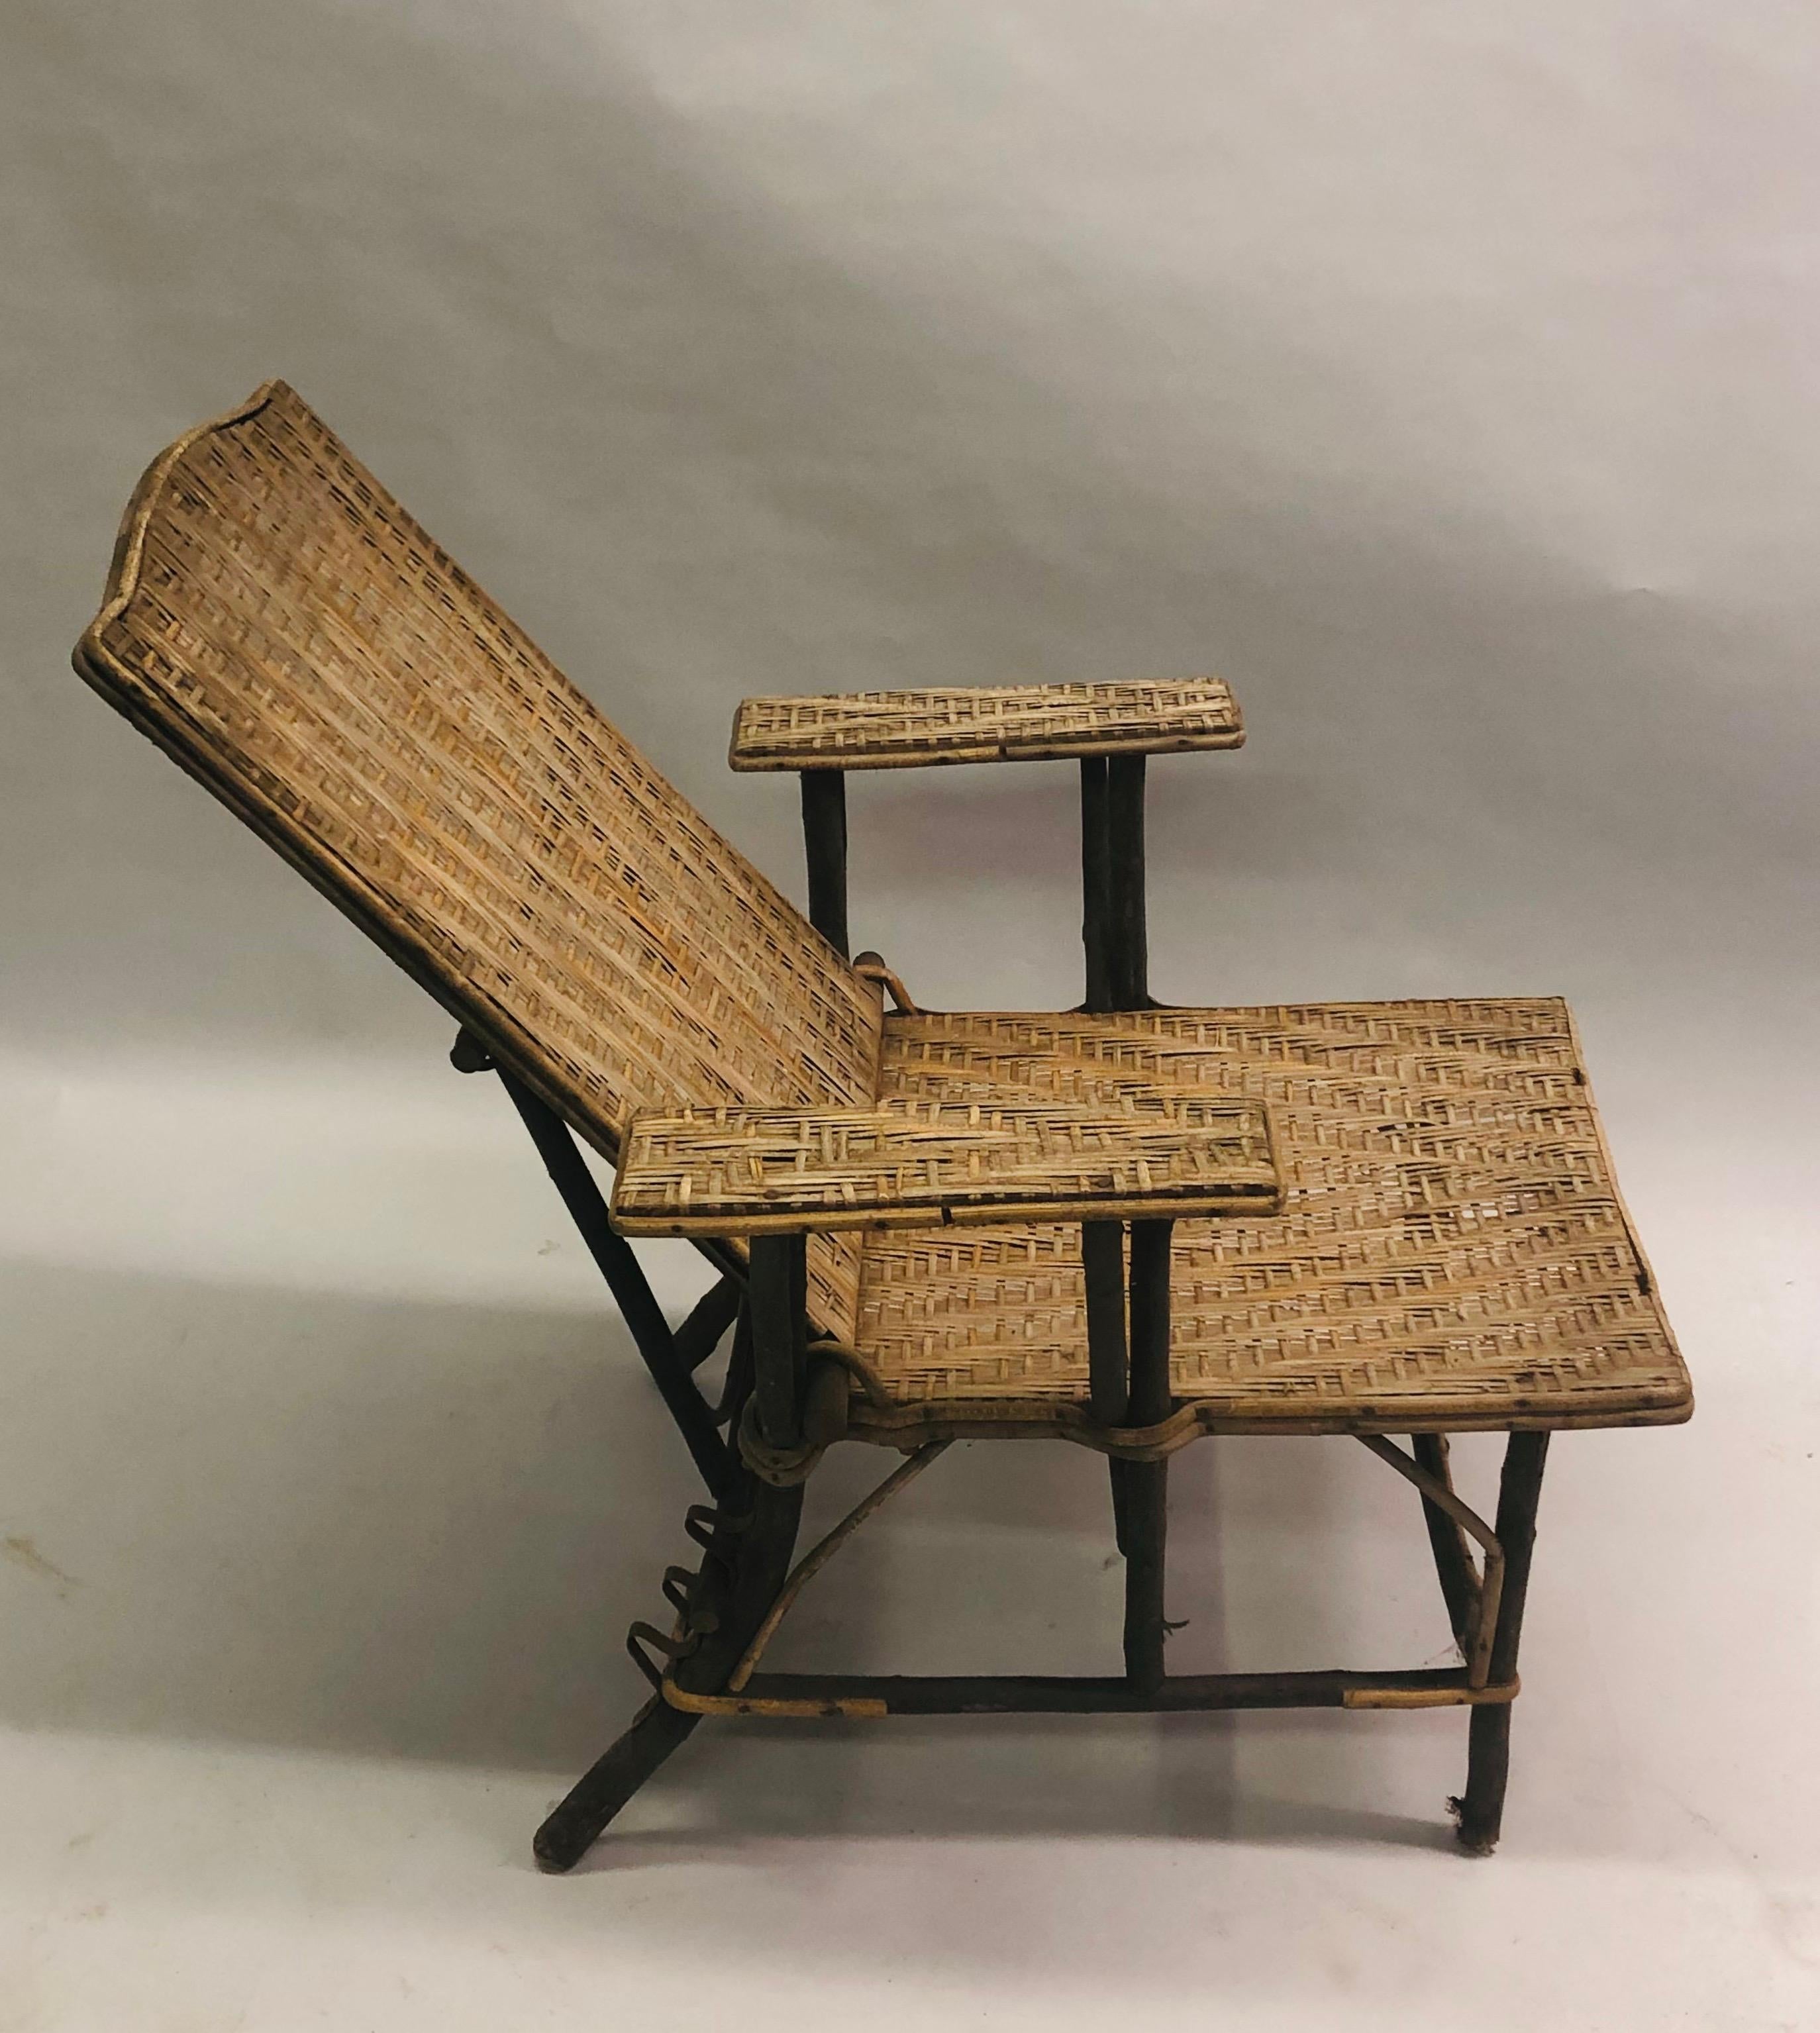 Bamboo French Art Deco Rattan Lounge Chair / Recliner / Chaise Longue, 1920 For Sale